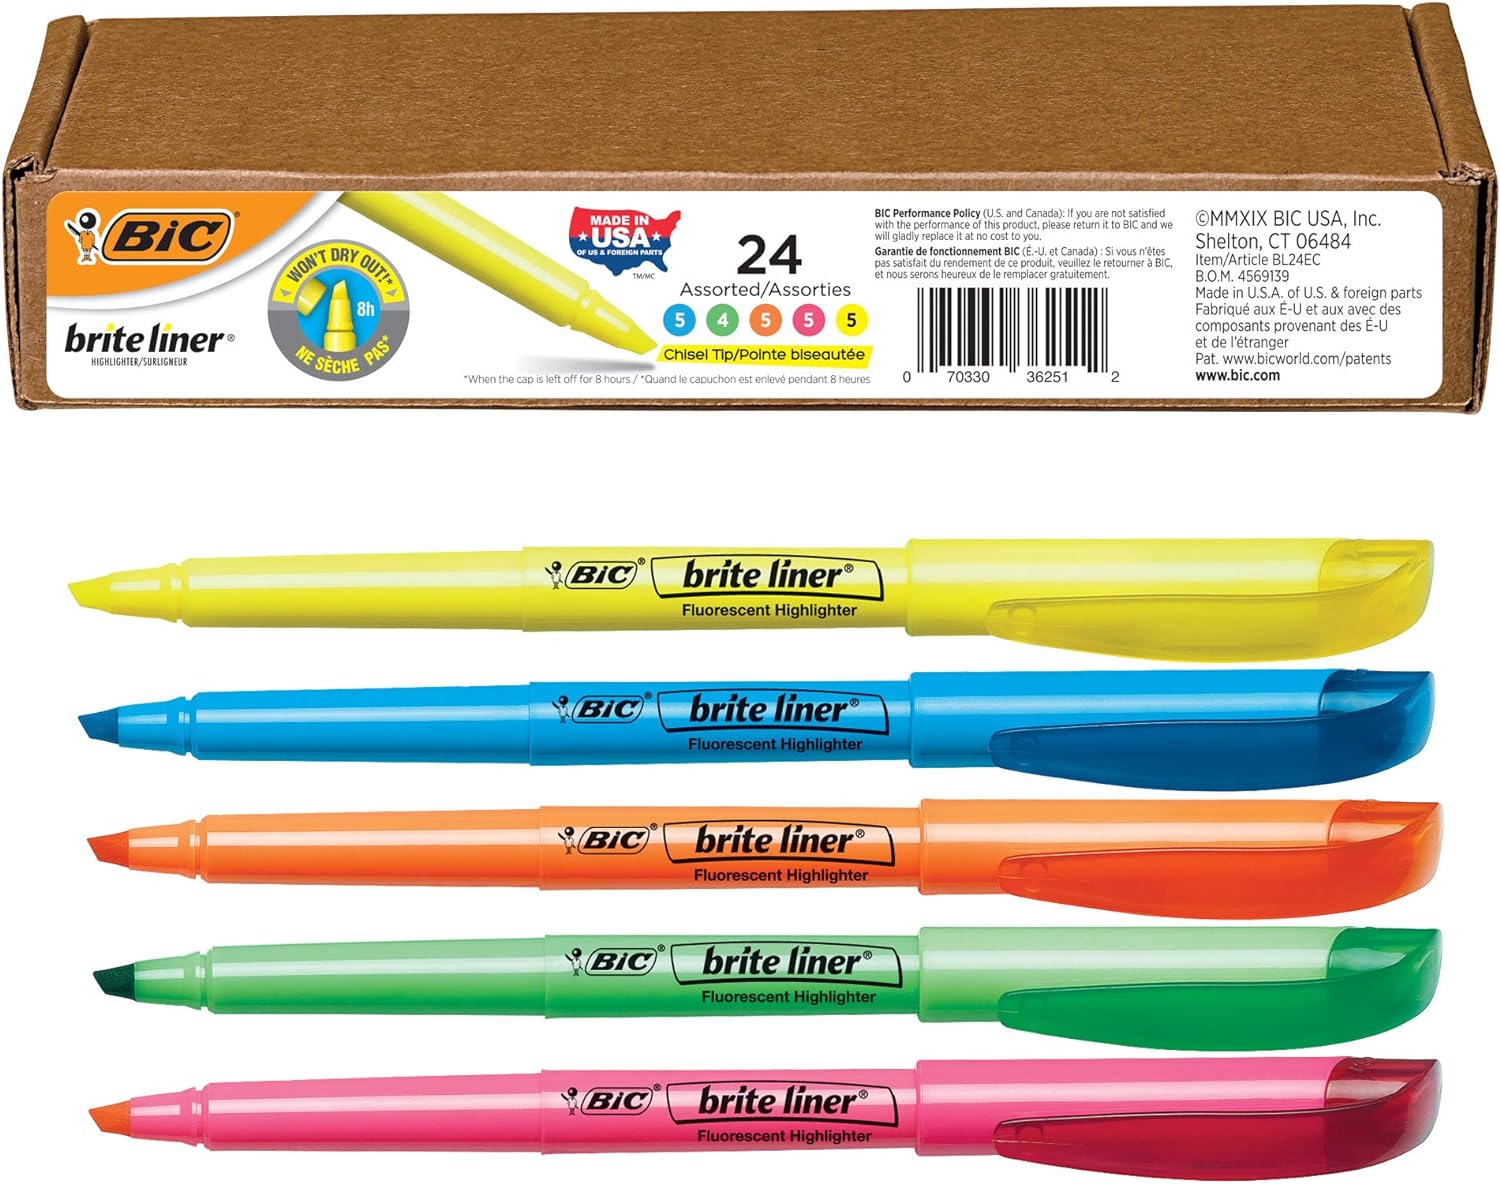 What a great surprise because I did not read the item information. You get 24 highlighters! Four different colors! The size is perfect for marking the important things in my guide book. I am a very happy customer!